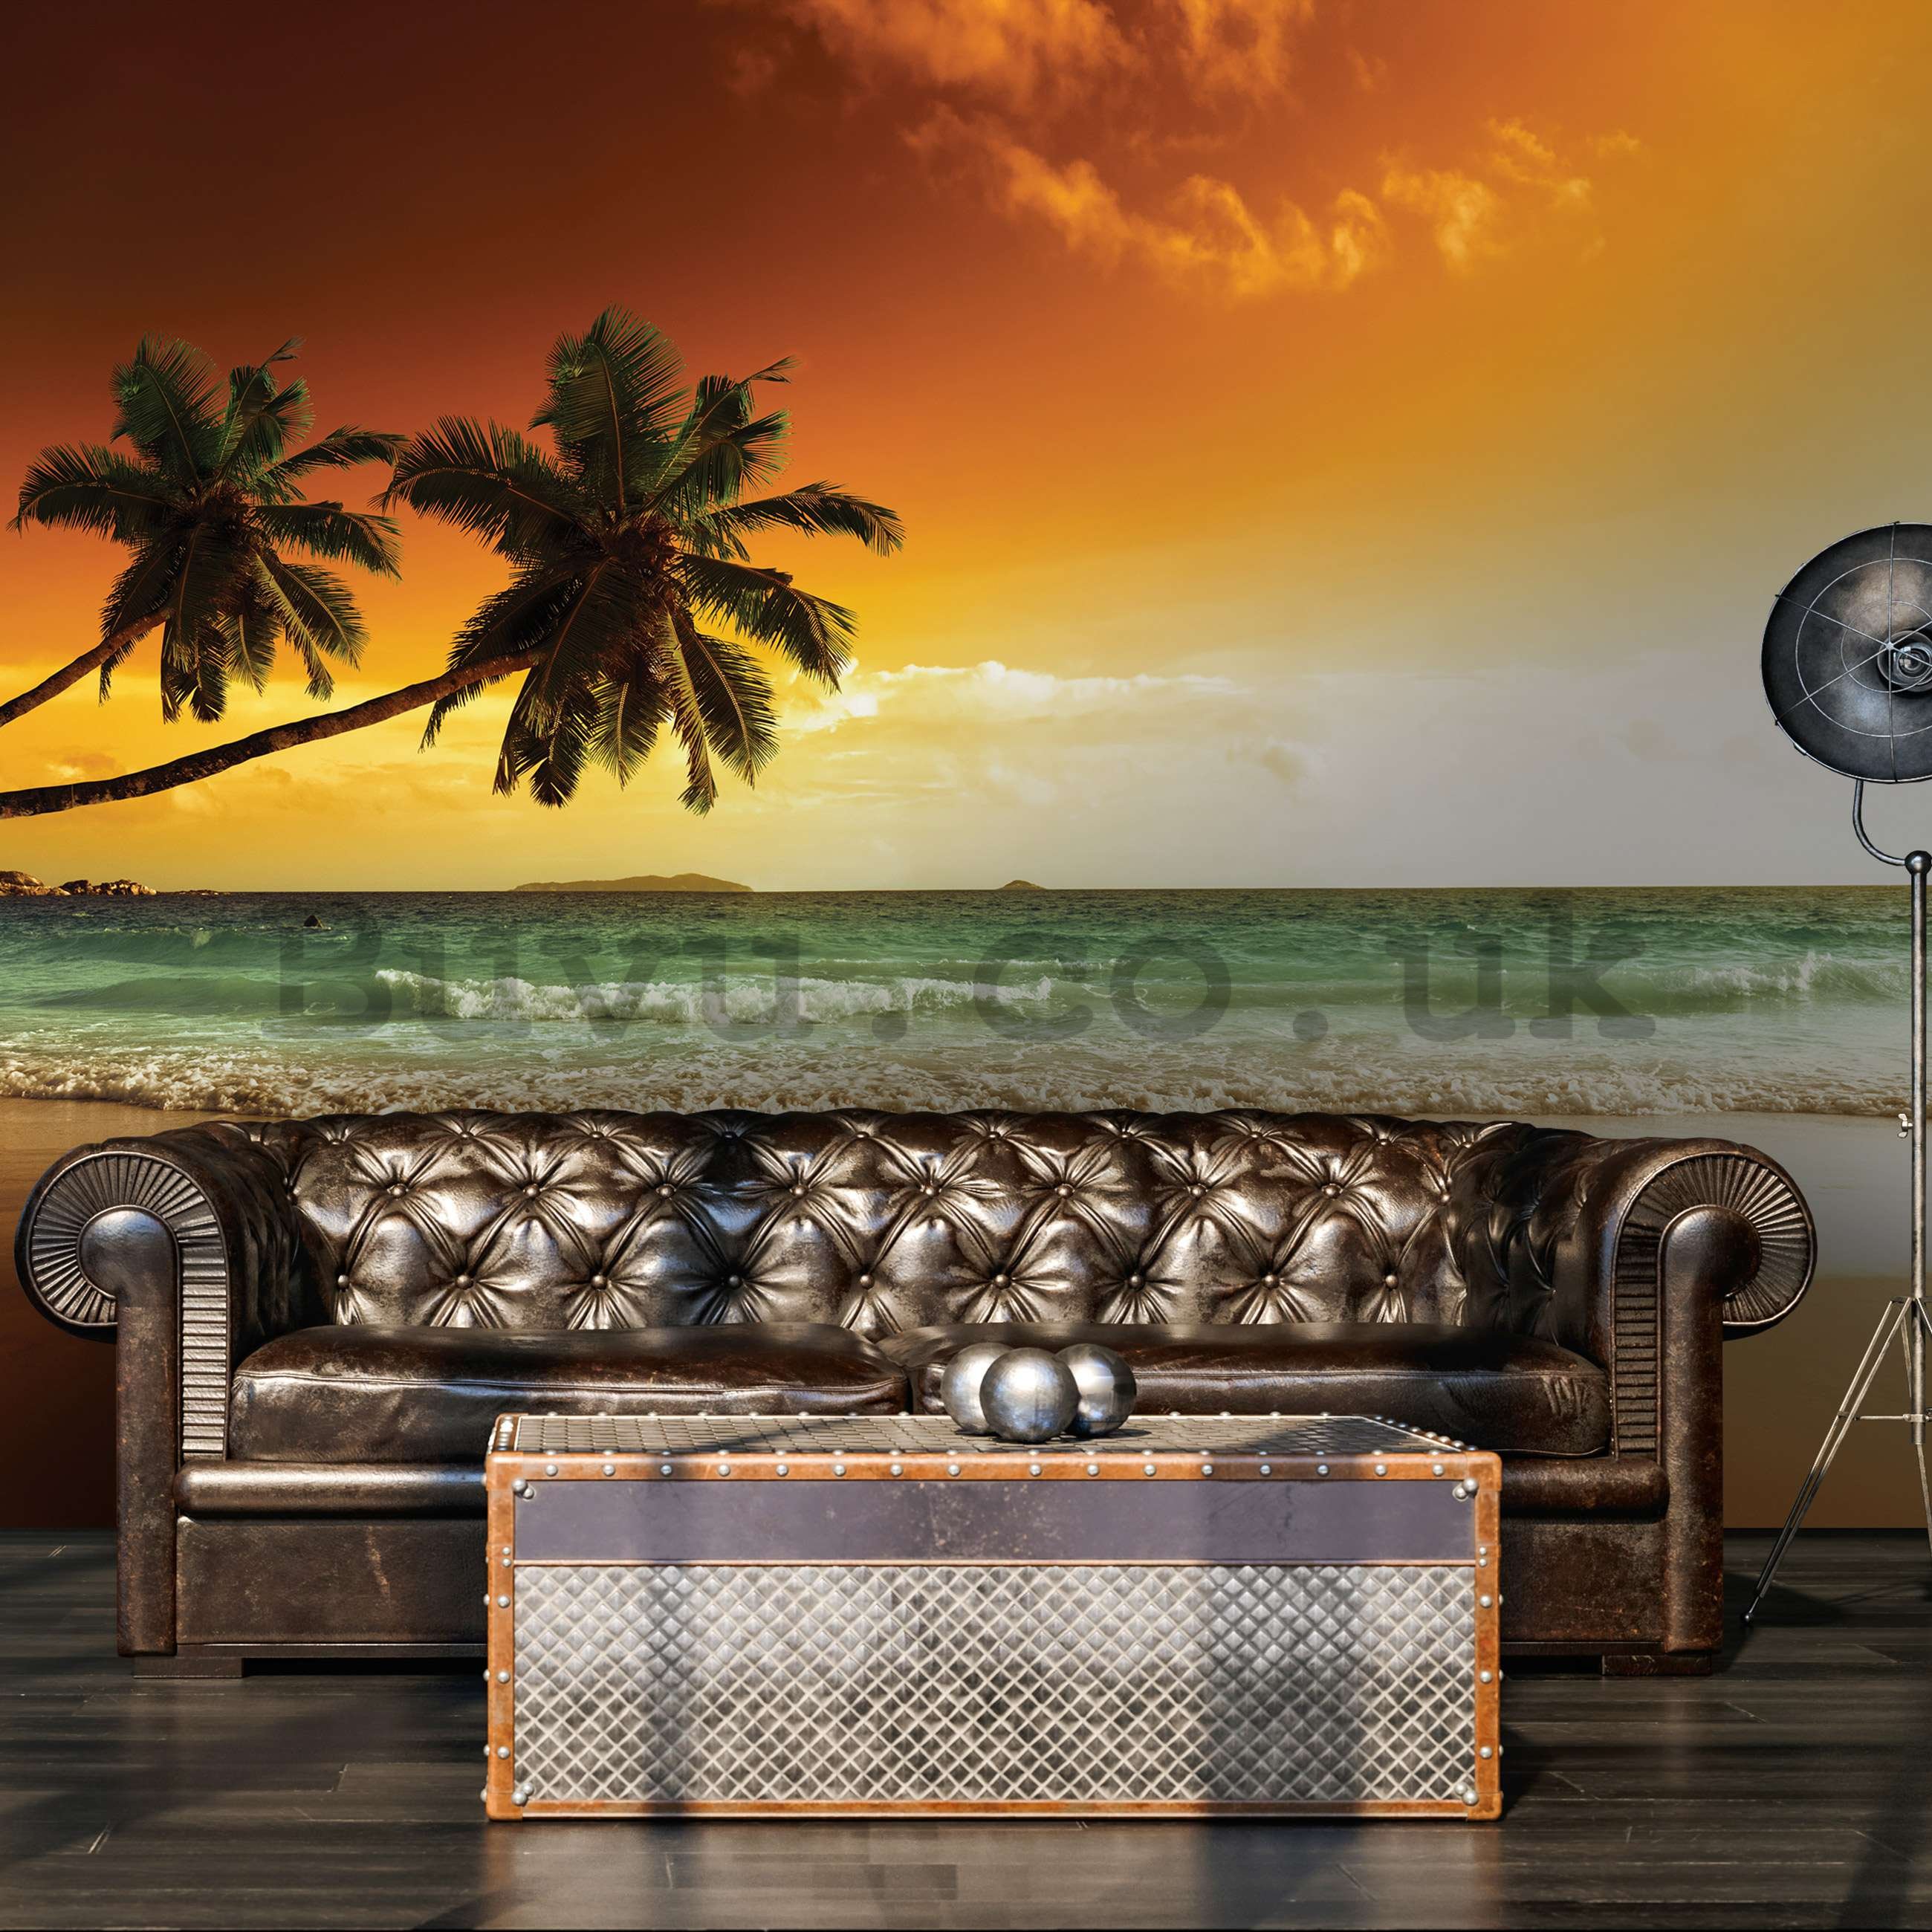 Wall mural vlies: Palm trees and beach at sunset - 152,5x104 cm